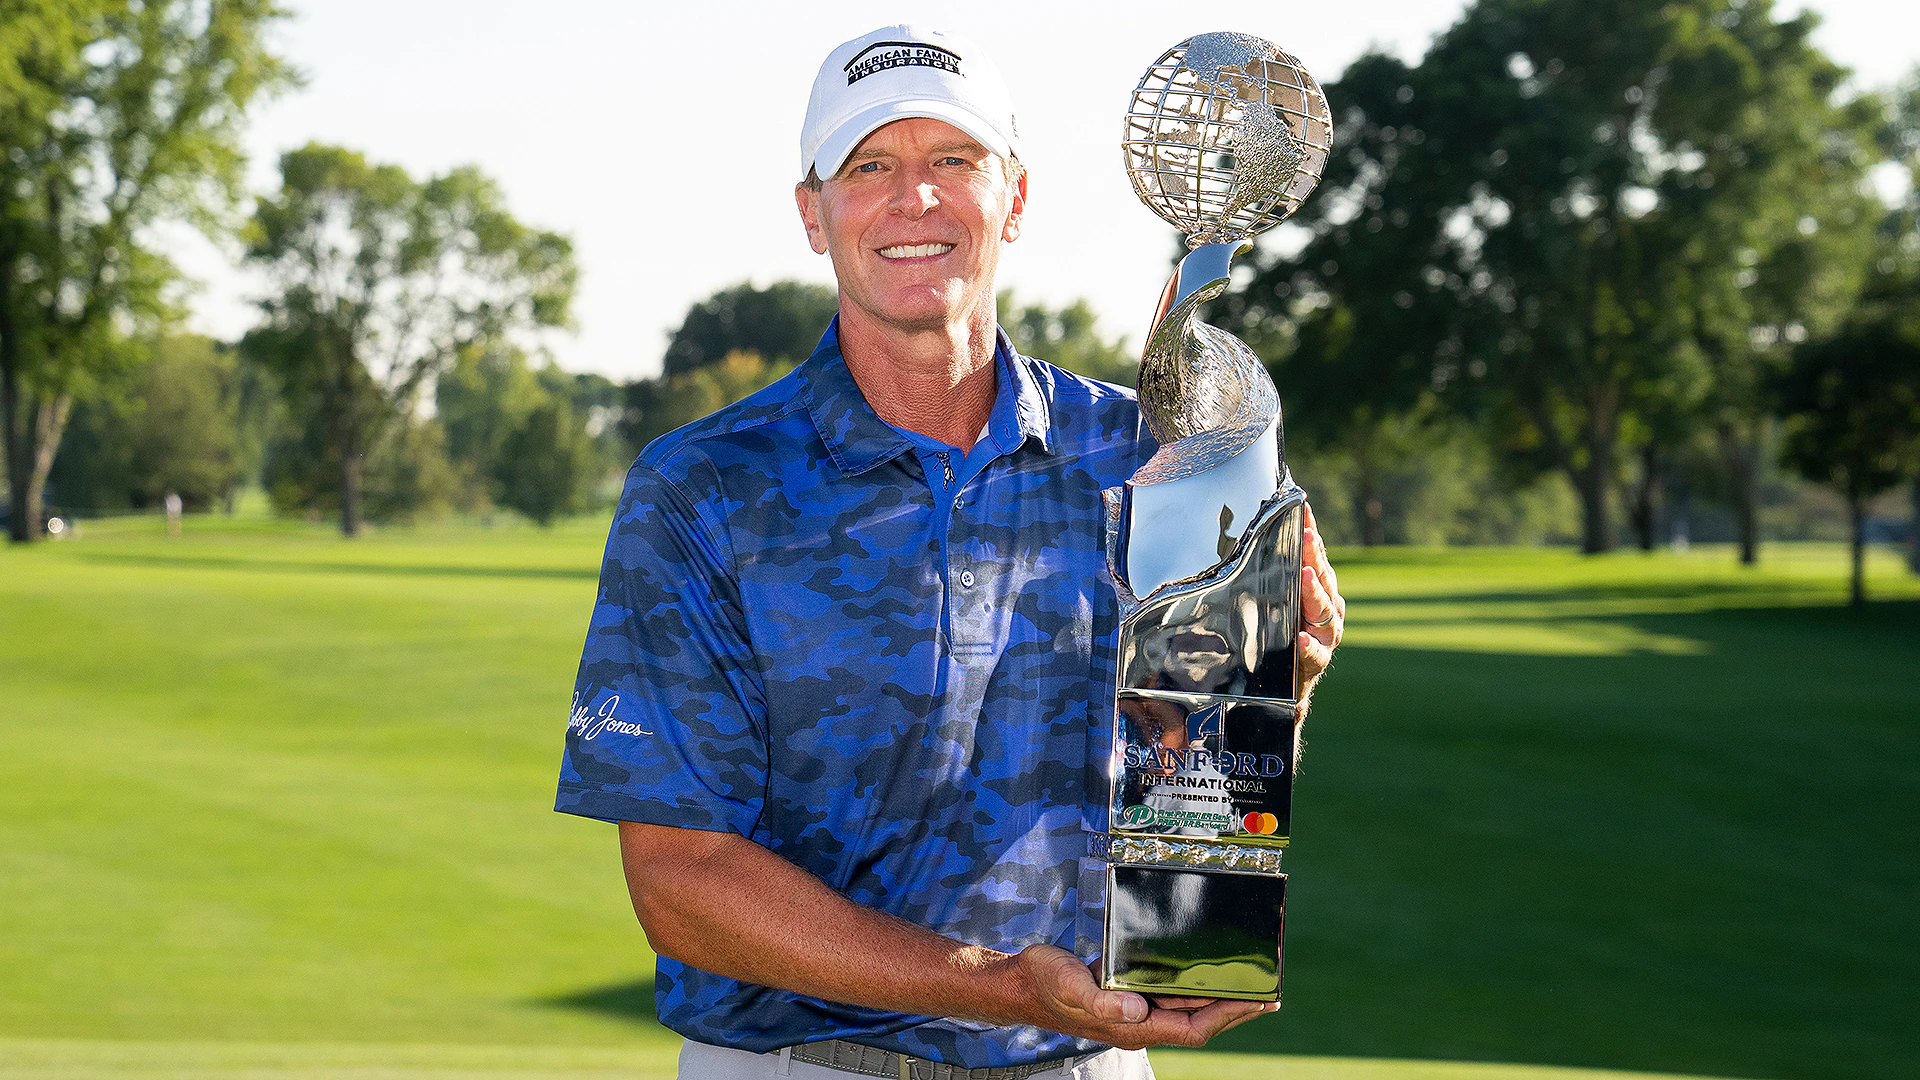 Steve Stricker beats Robert Karlsson in playoff to win second straight Champions event